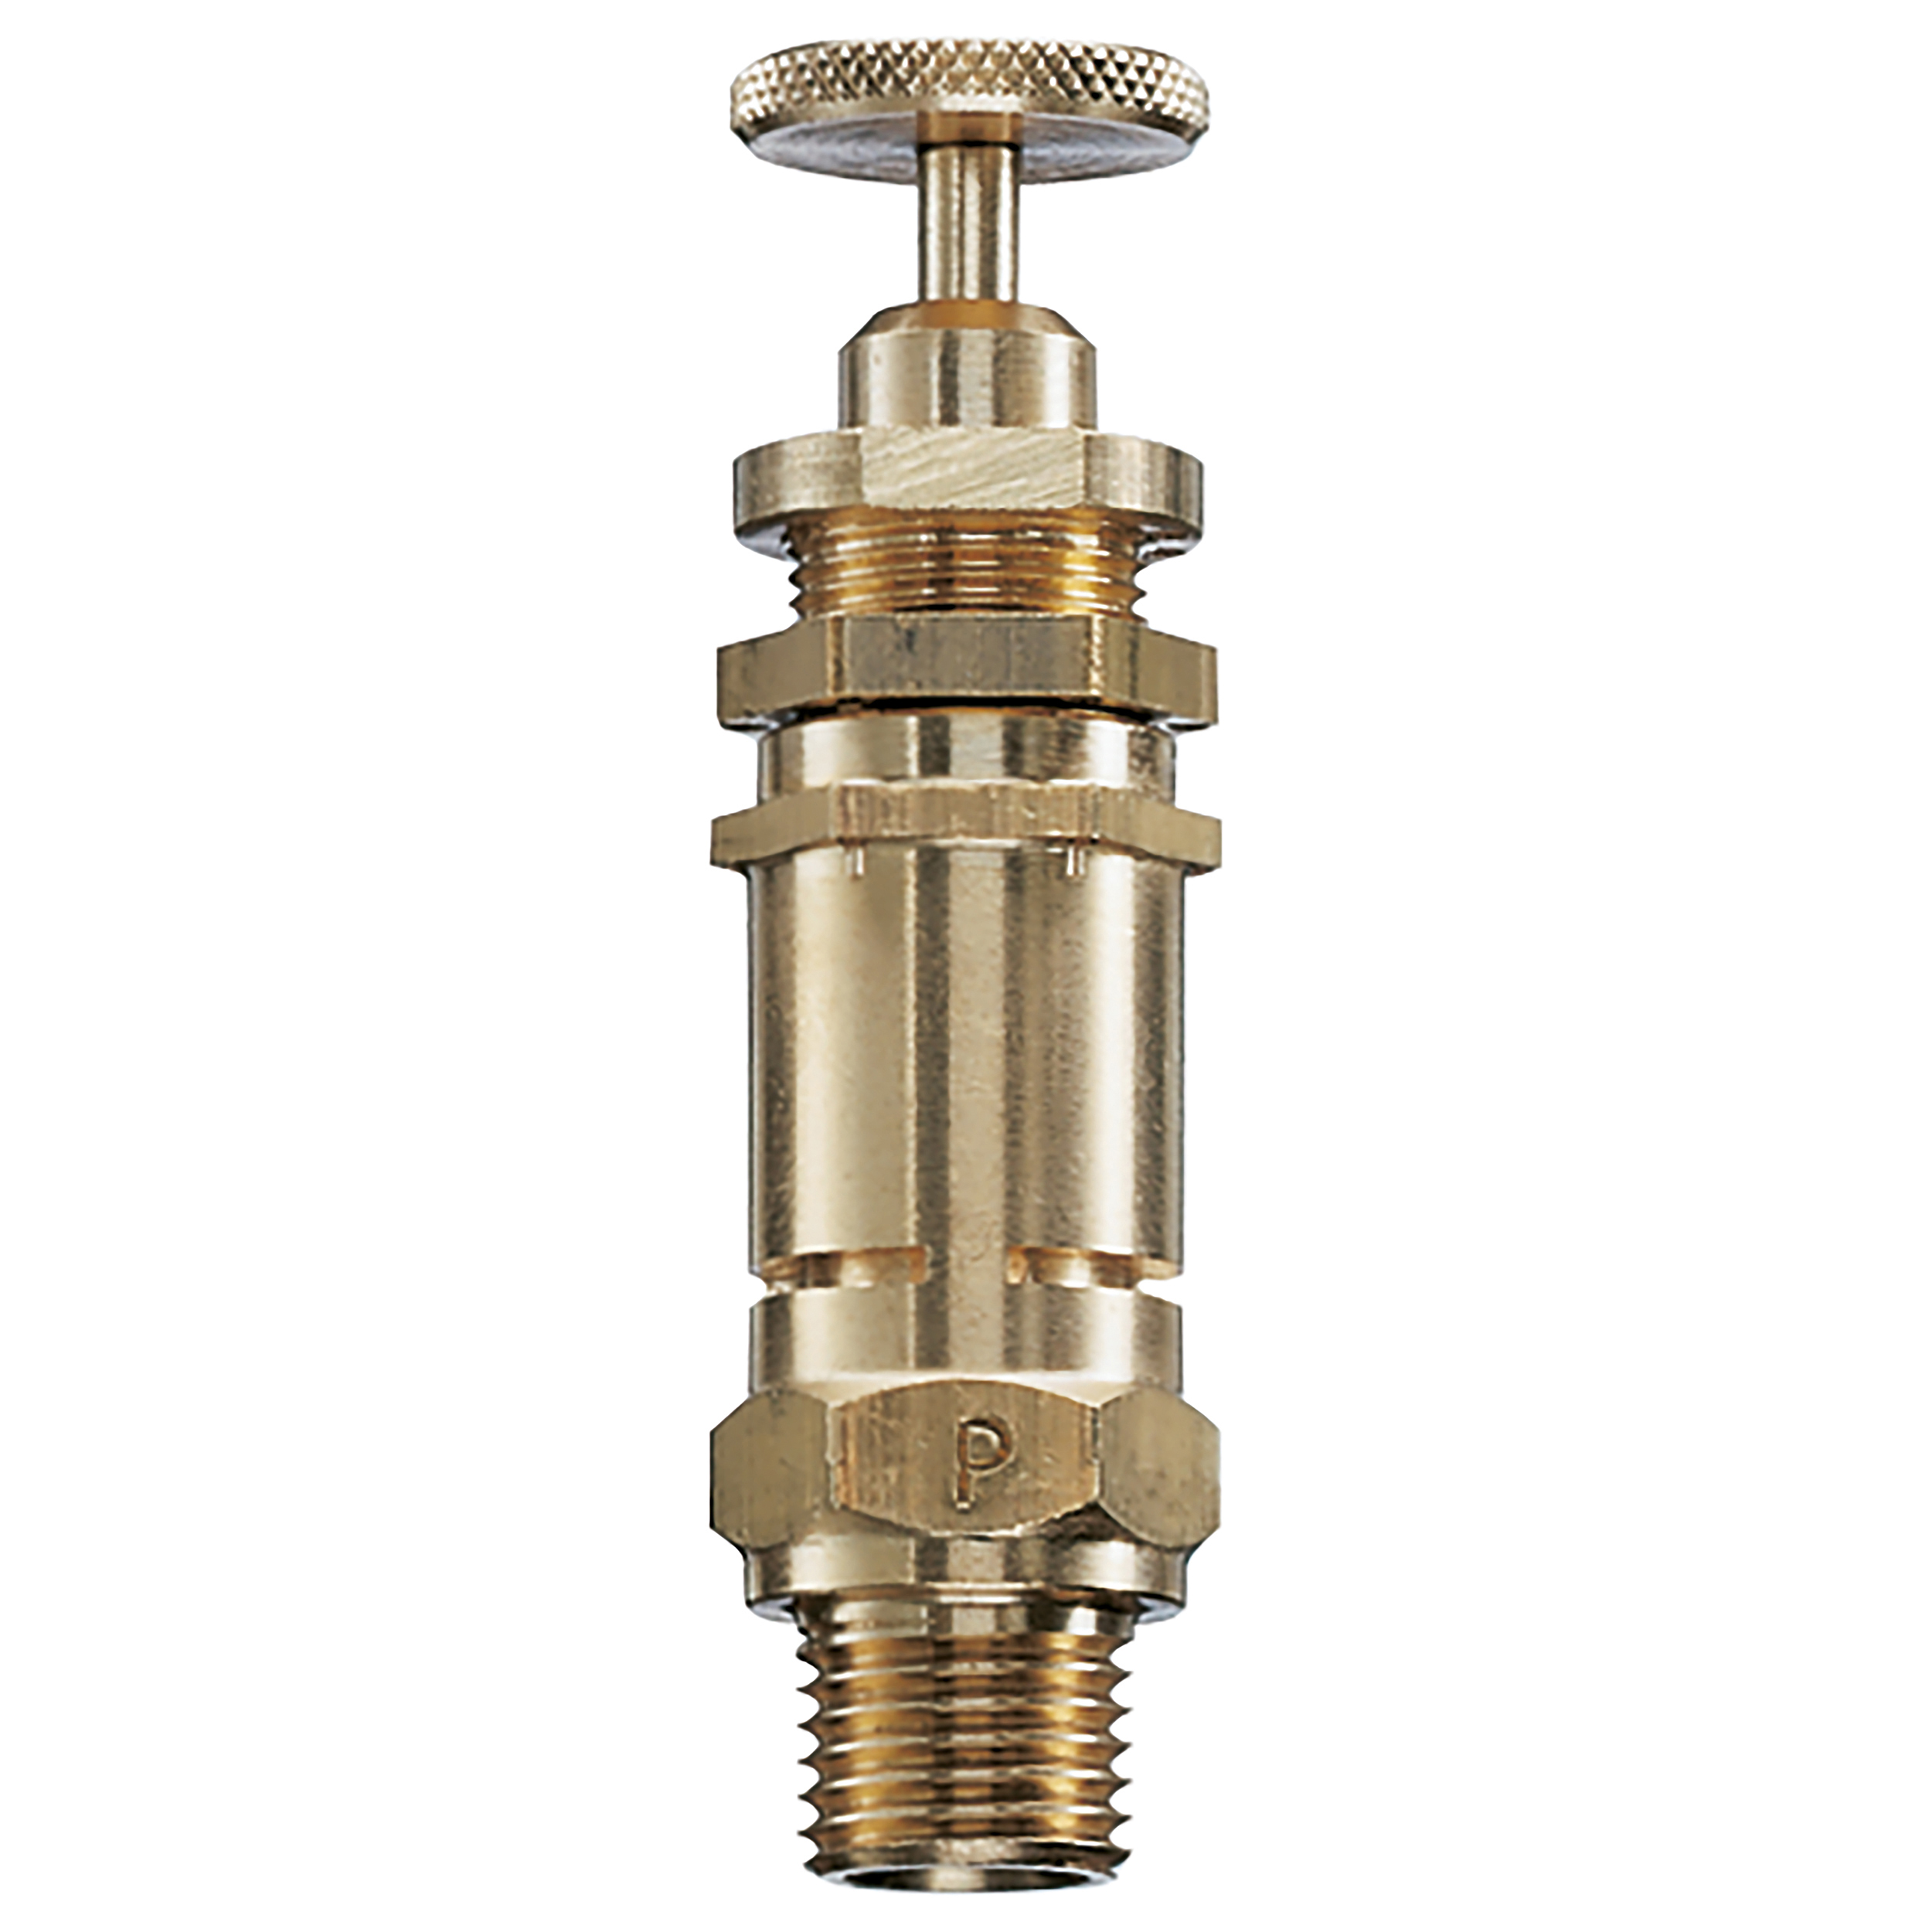 Blow-off valve DN 6, G ¼, set pressure: 2.9 bar (42 psi), seal: metal, not component tested